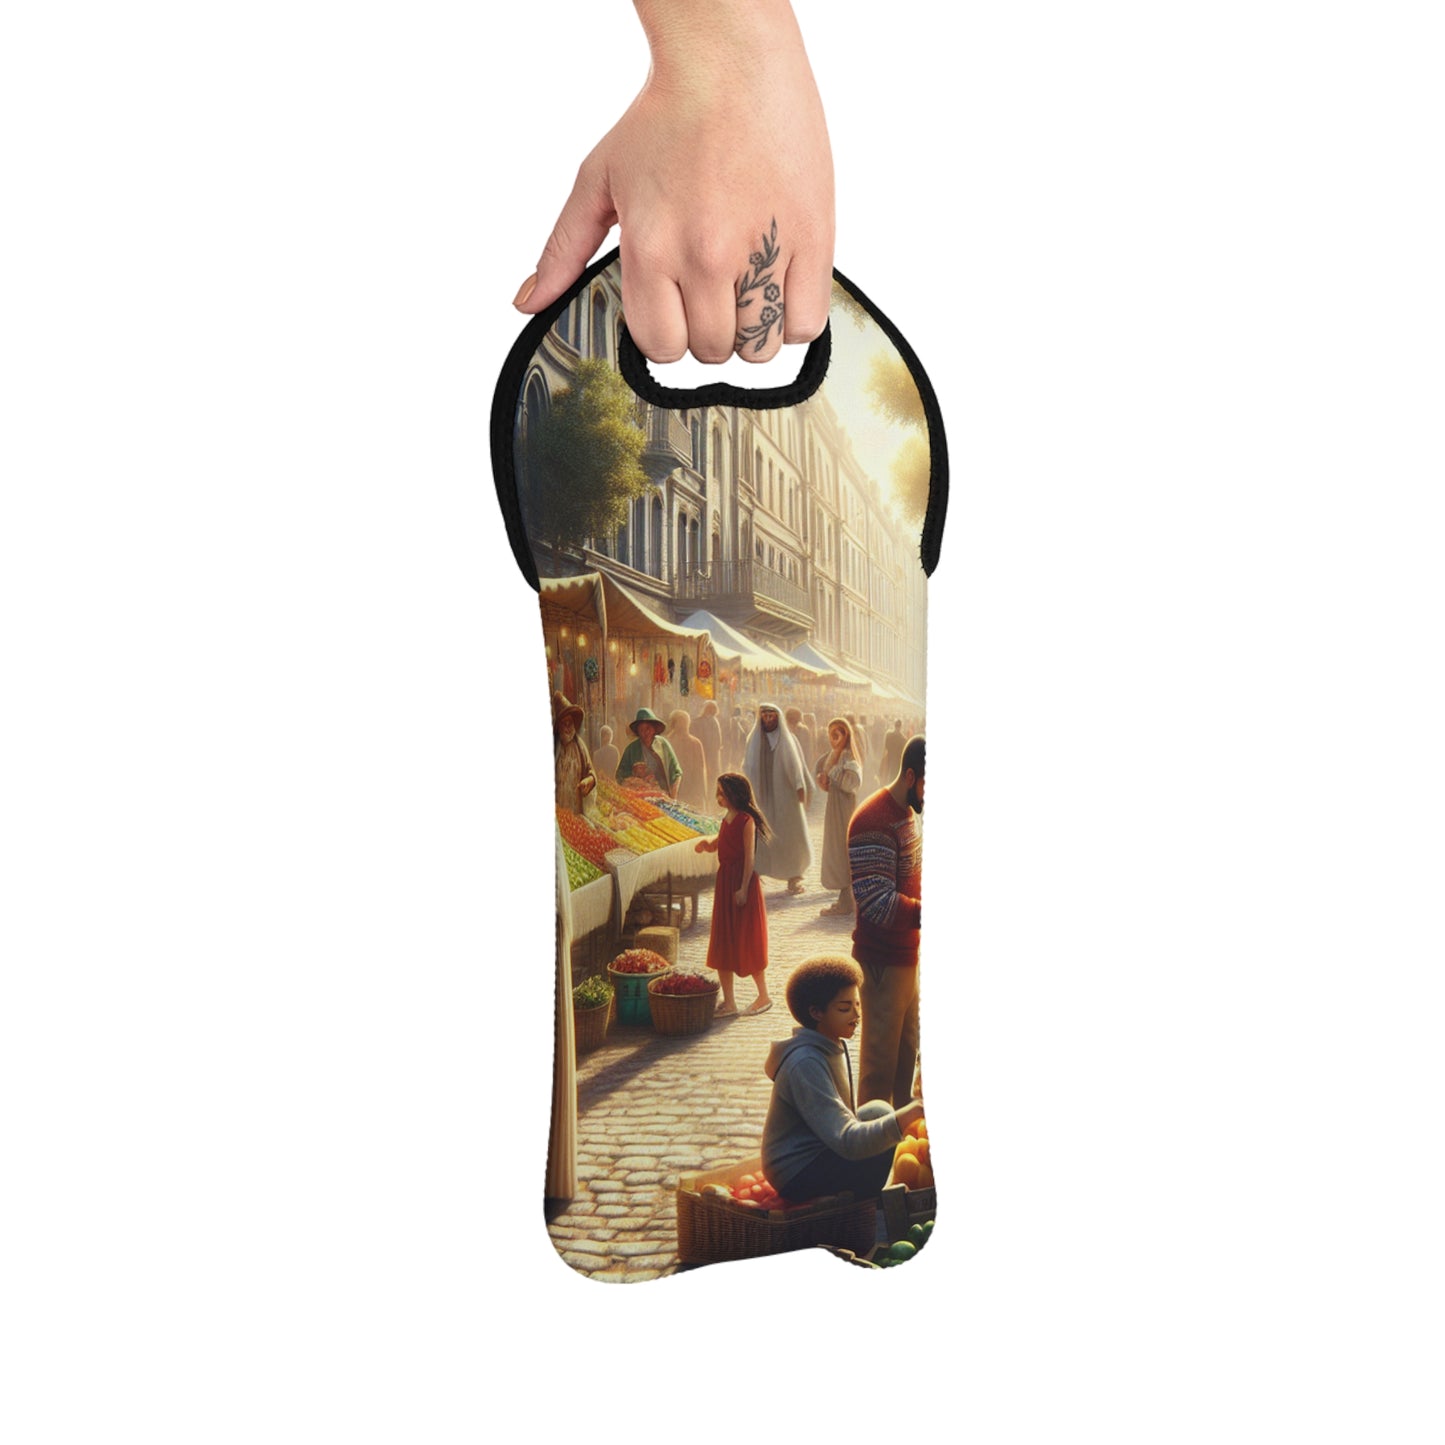 "Sunny Vibes at the Outdoor Market" - The Alien Wine Tote Bag Realism Style